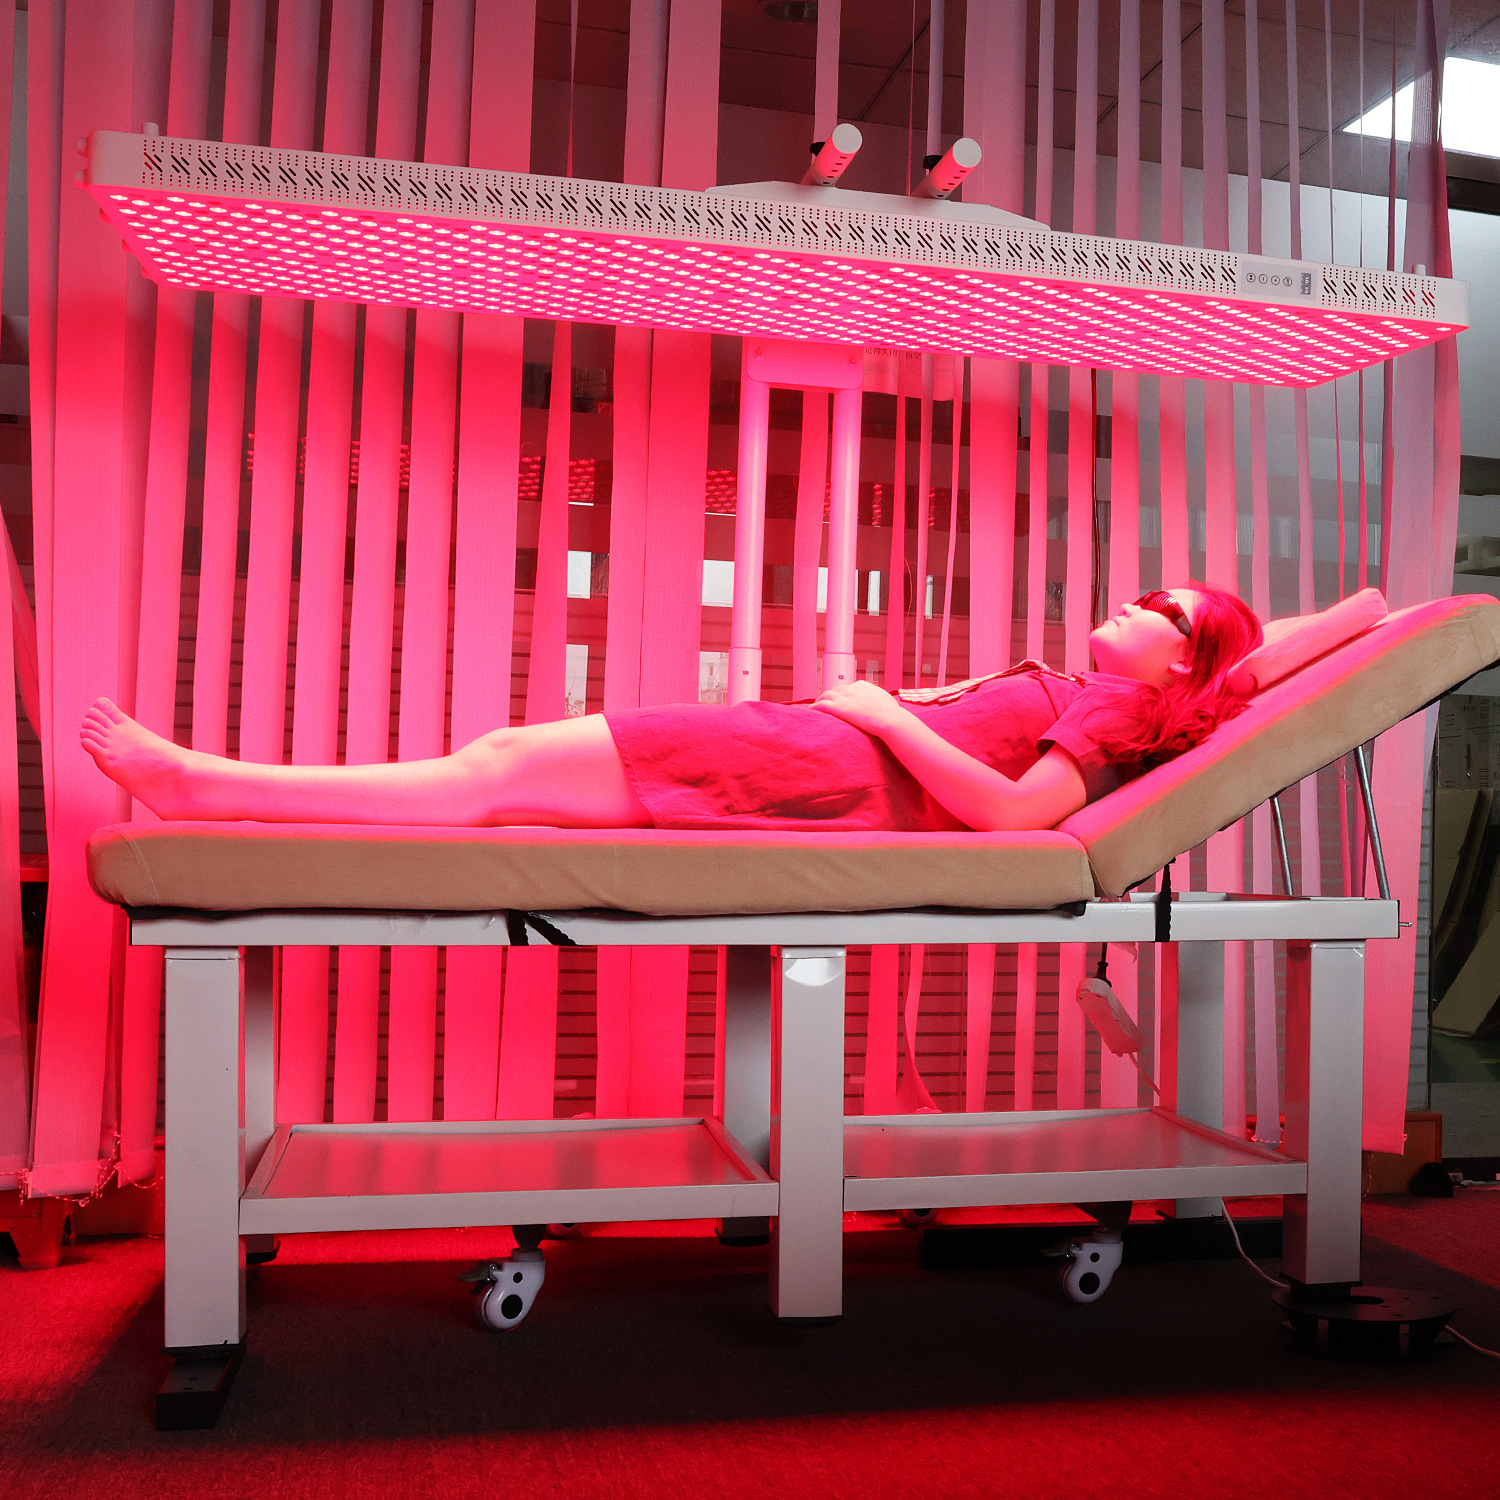 RL2000 infrared red light therapy bed tanning